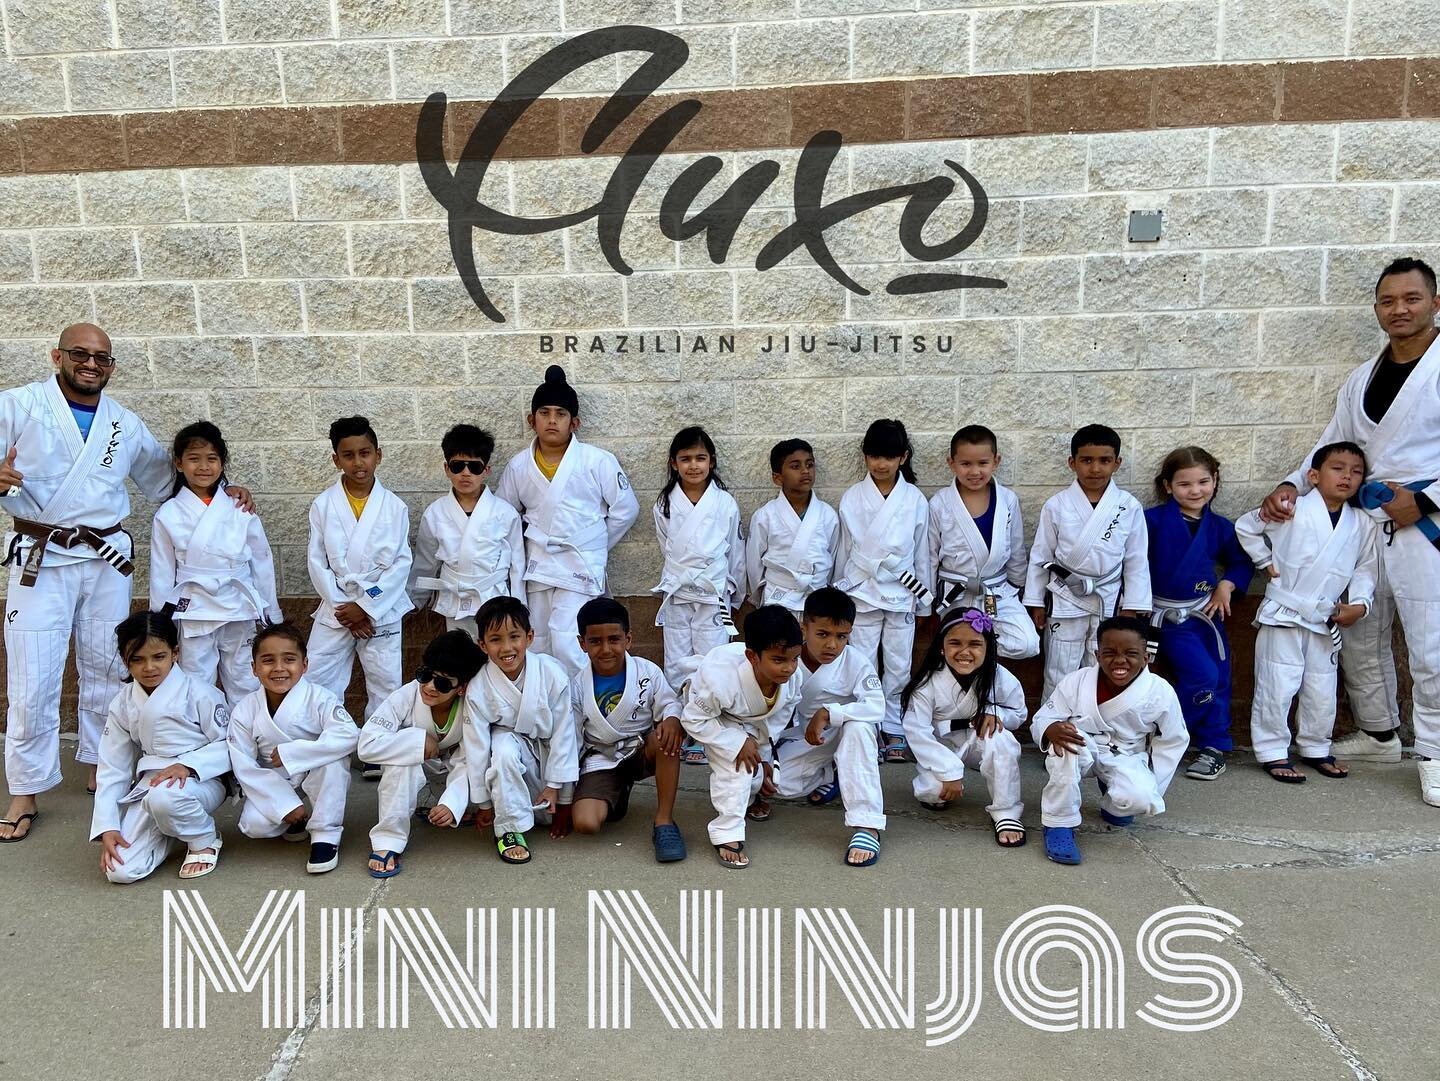 Earned, never given. 

The Mini Ninjas class had a superb week of grading week. 

⚔️ Day 1, we reviewed some of the basic skills and positions they should have an understanding of using and controlling. 

⚔️ Day 2, we did lots of drills and learned s